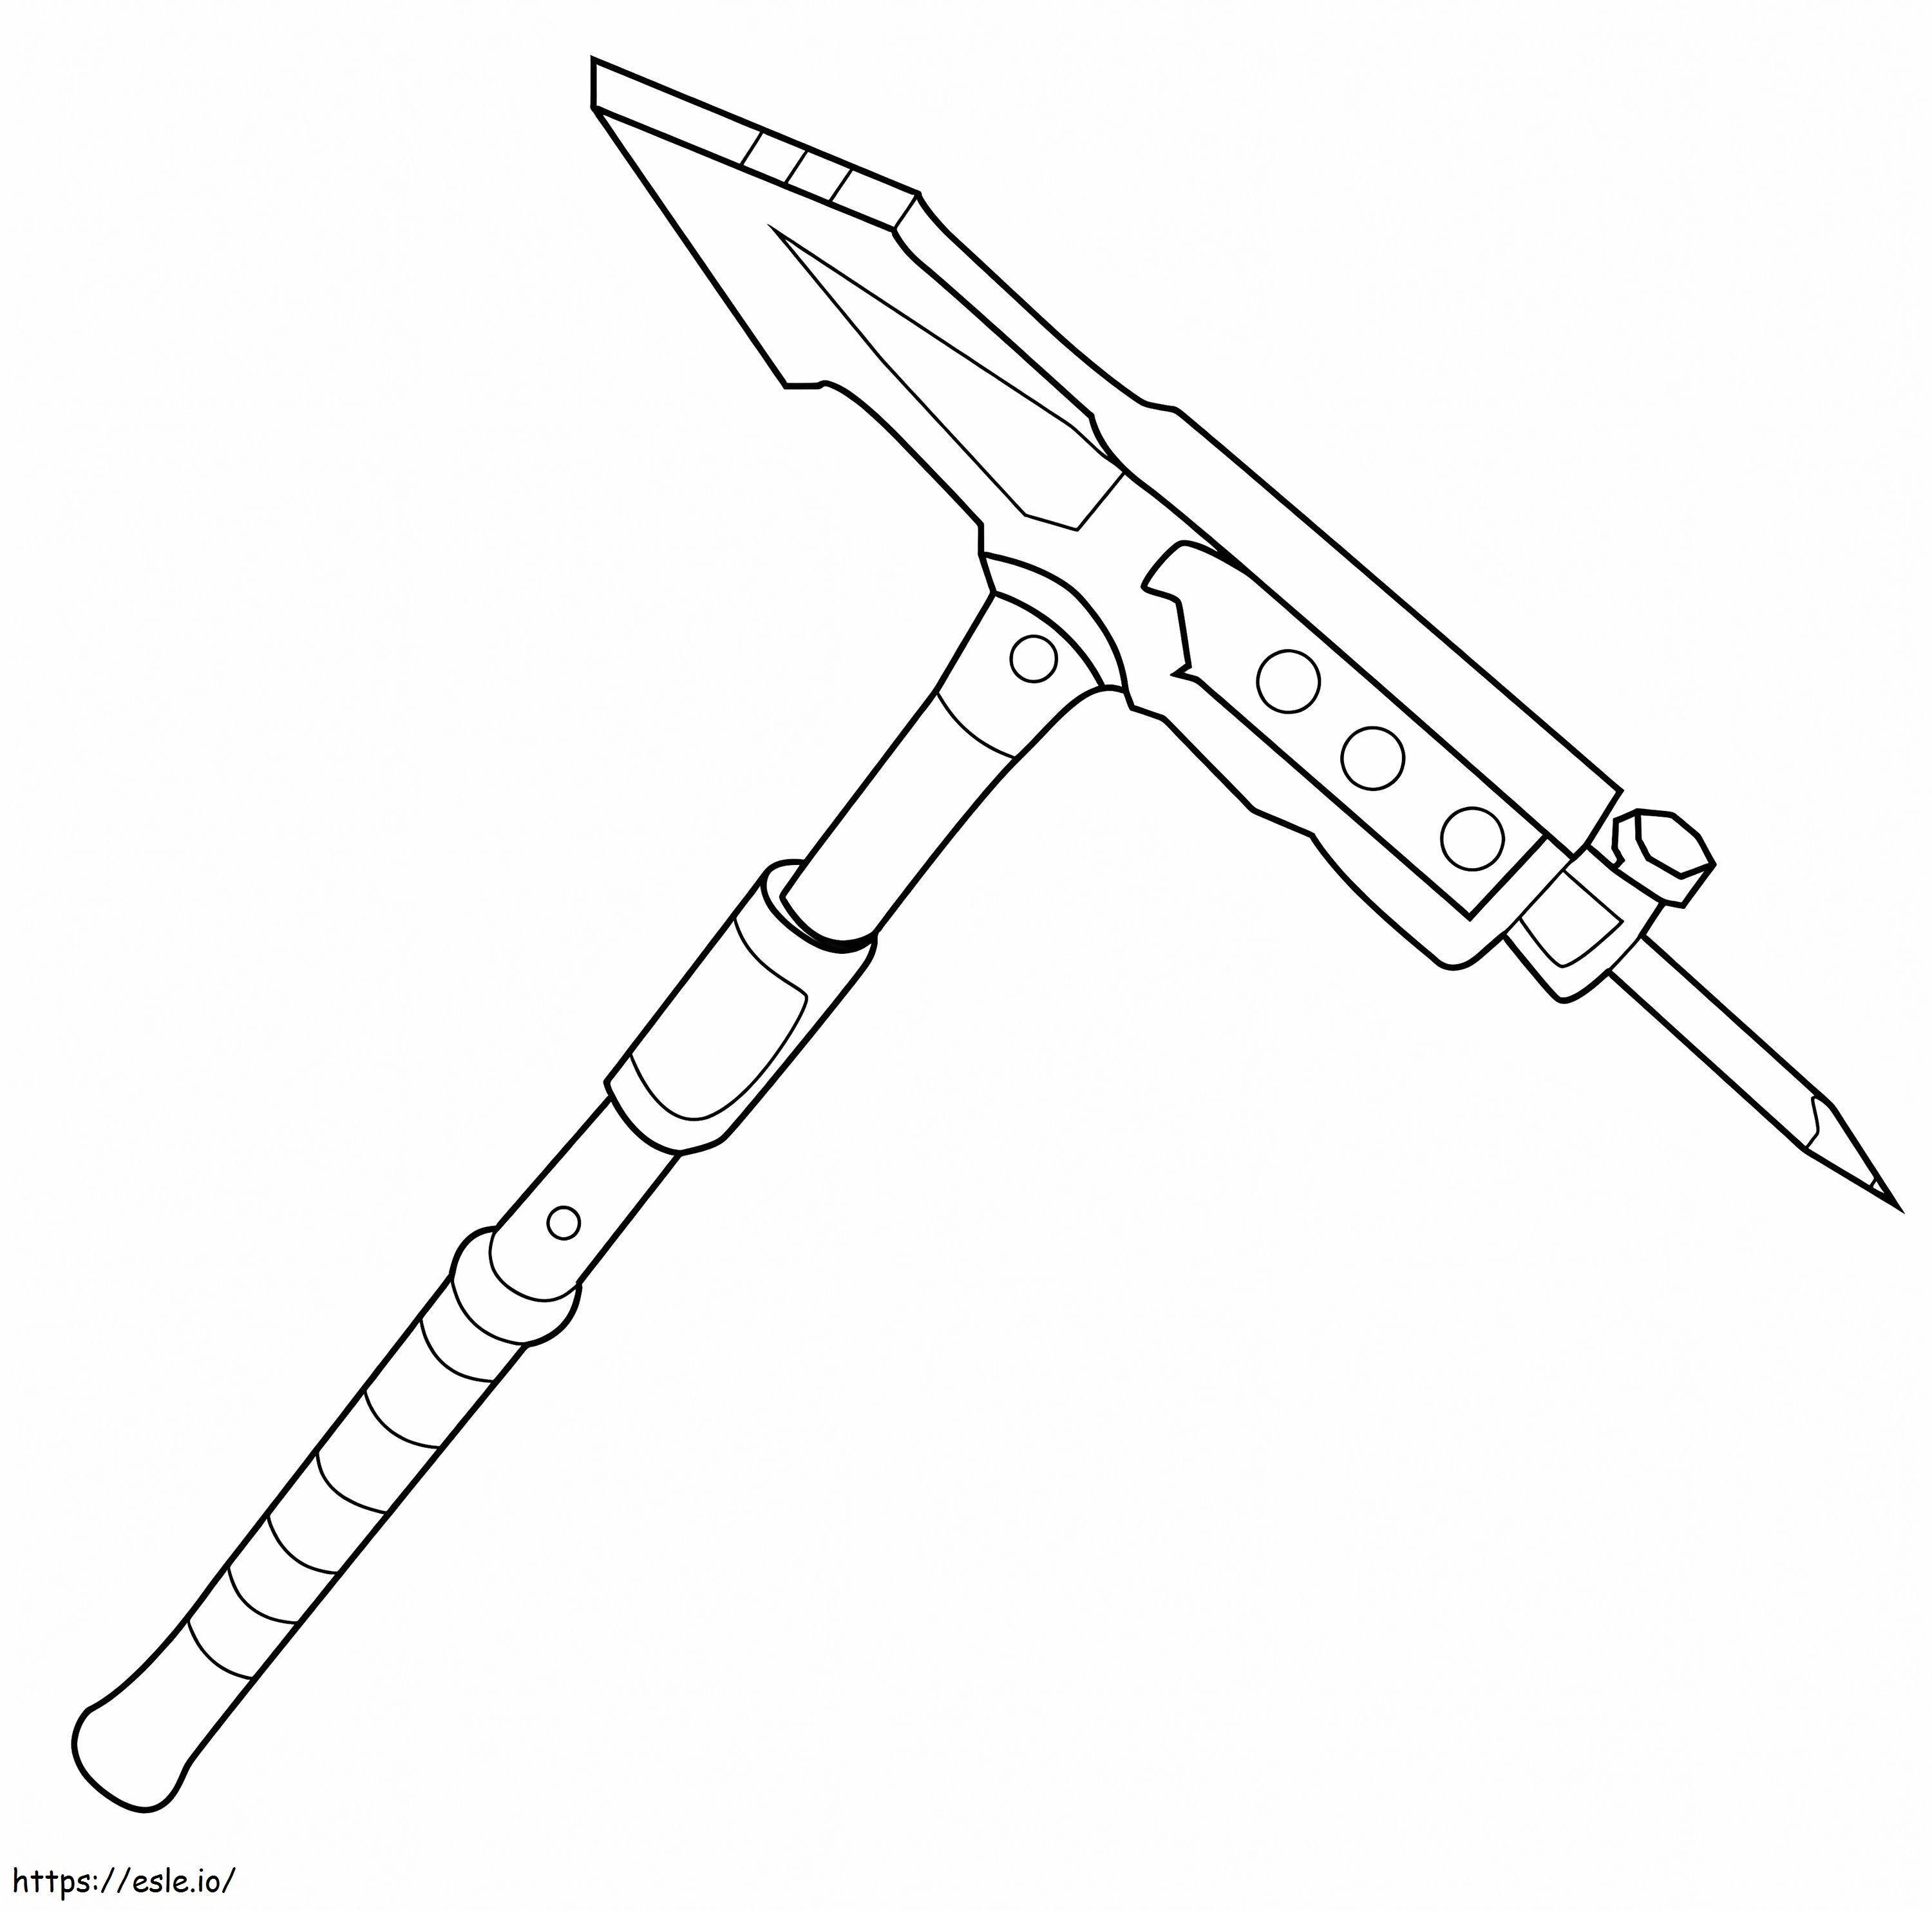 Trusty No 2 From Fortnite coloring page